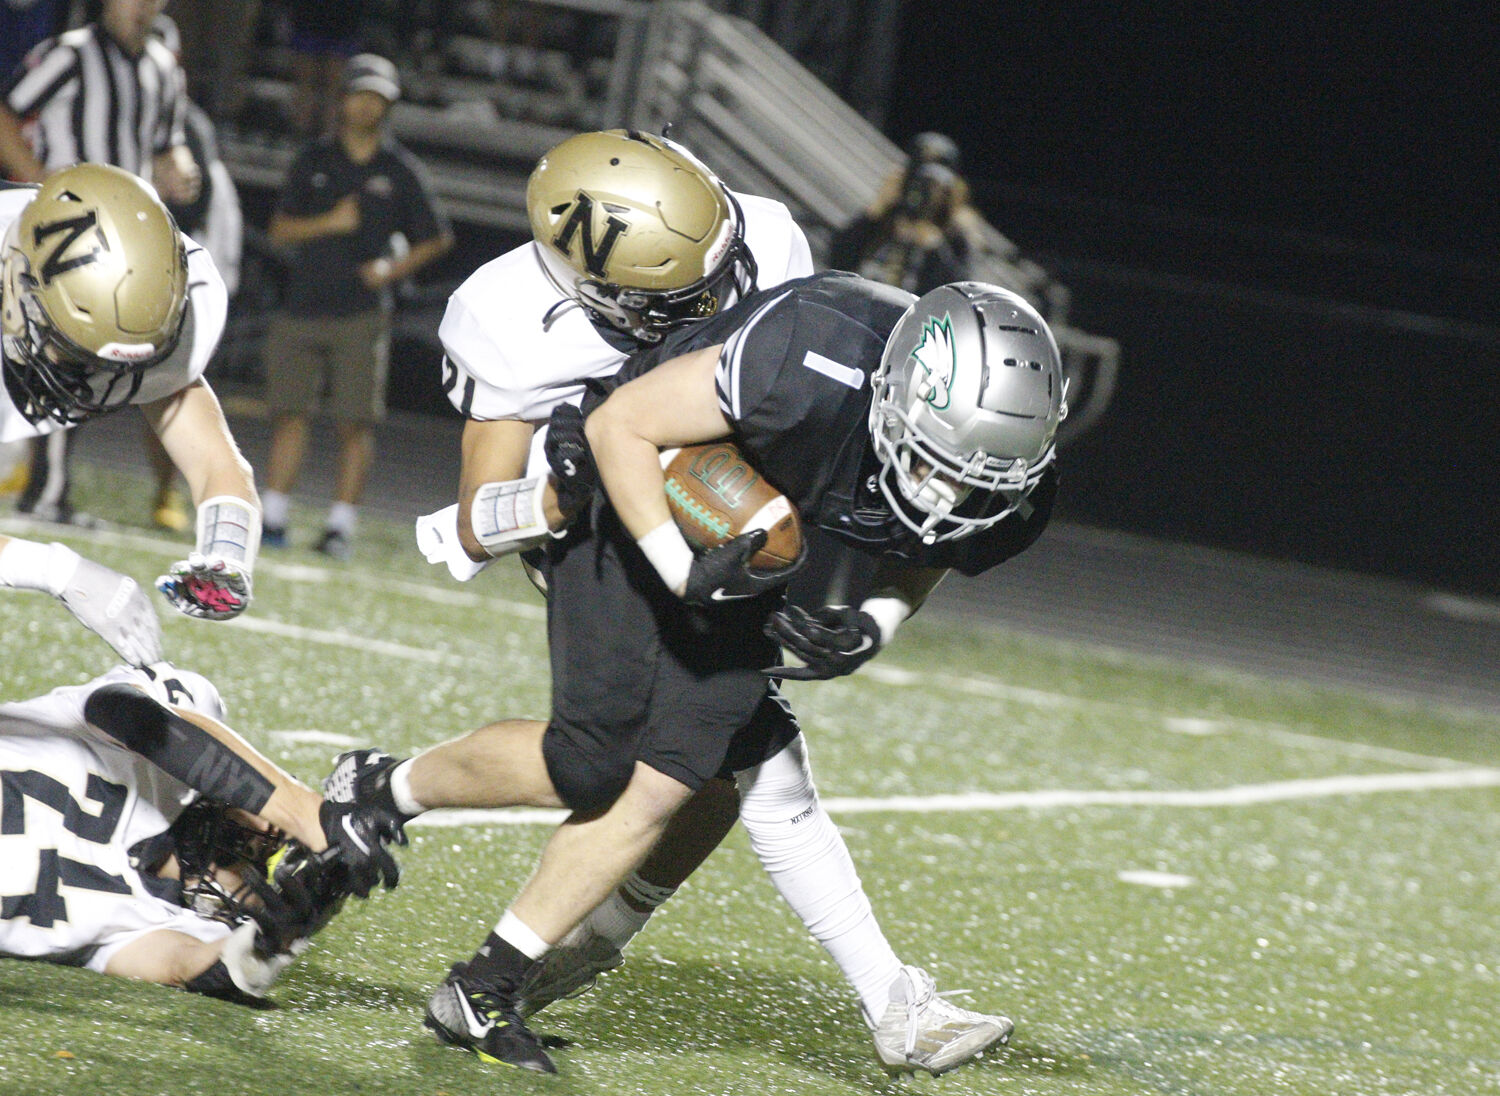 Zionsville Eagles Fall to Noblesville Millers in Sectional Opener